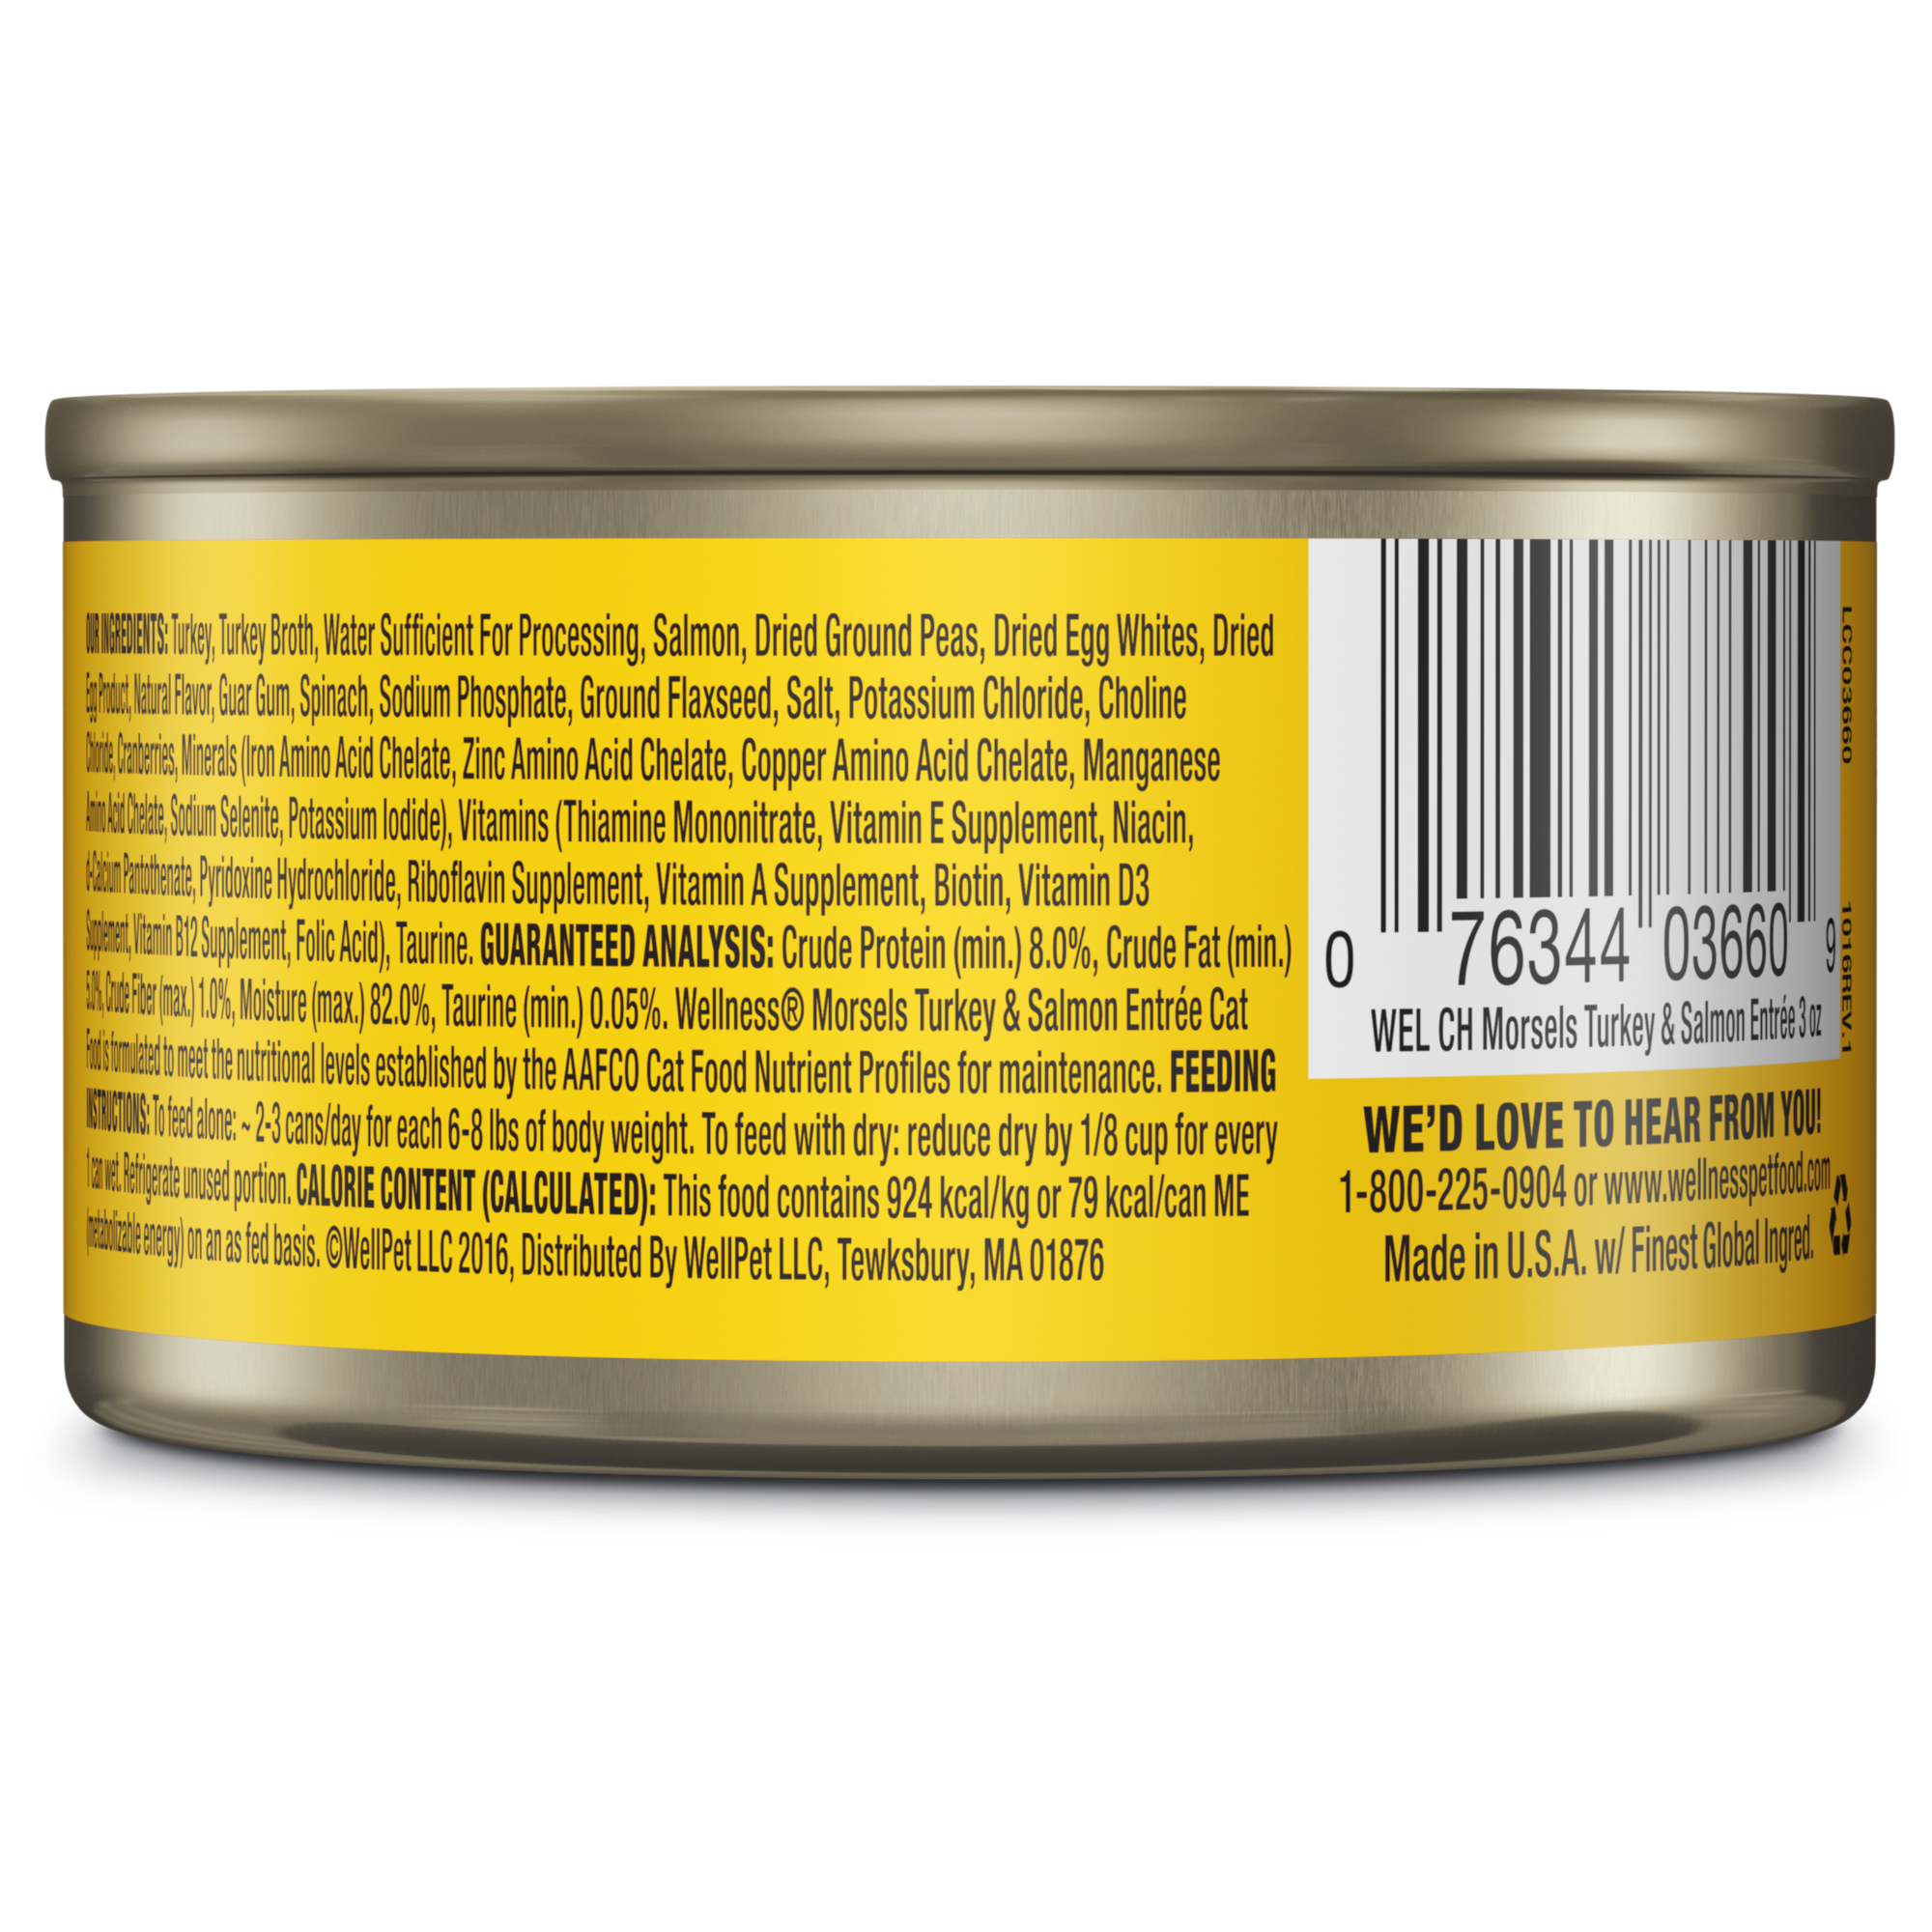 Wellness Complete Health Natural Grain Free Wet Canned Cat Food, Cubed Turkey & Salmon Entree, 3-Ounce Can (Pack of 24) - image 2 of 8